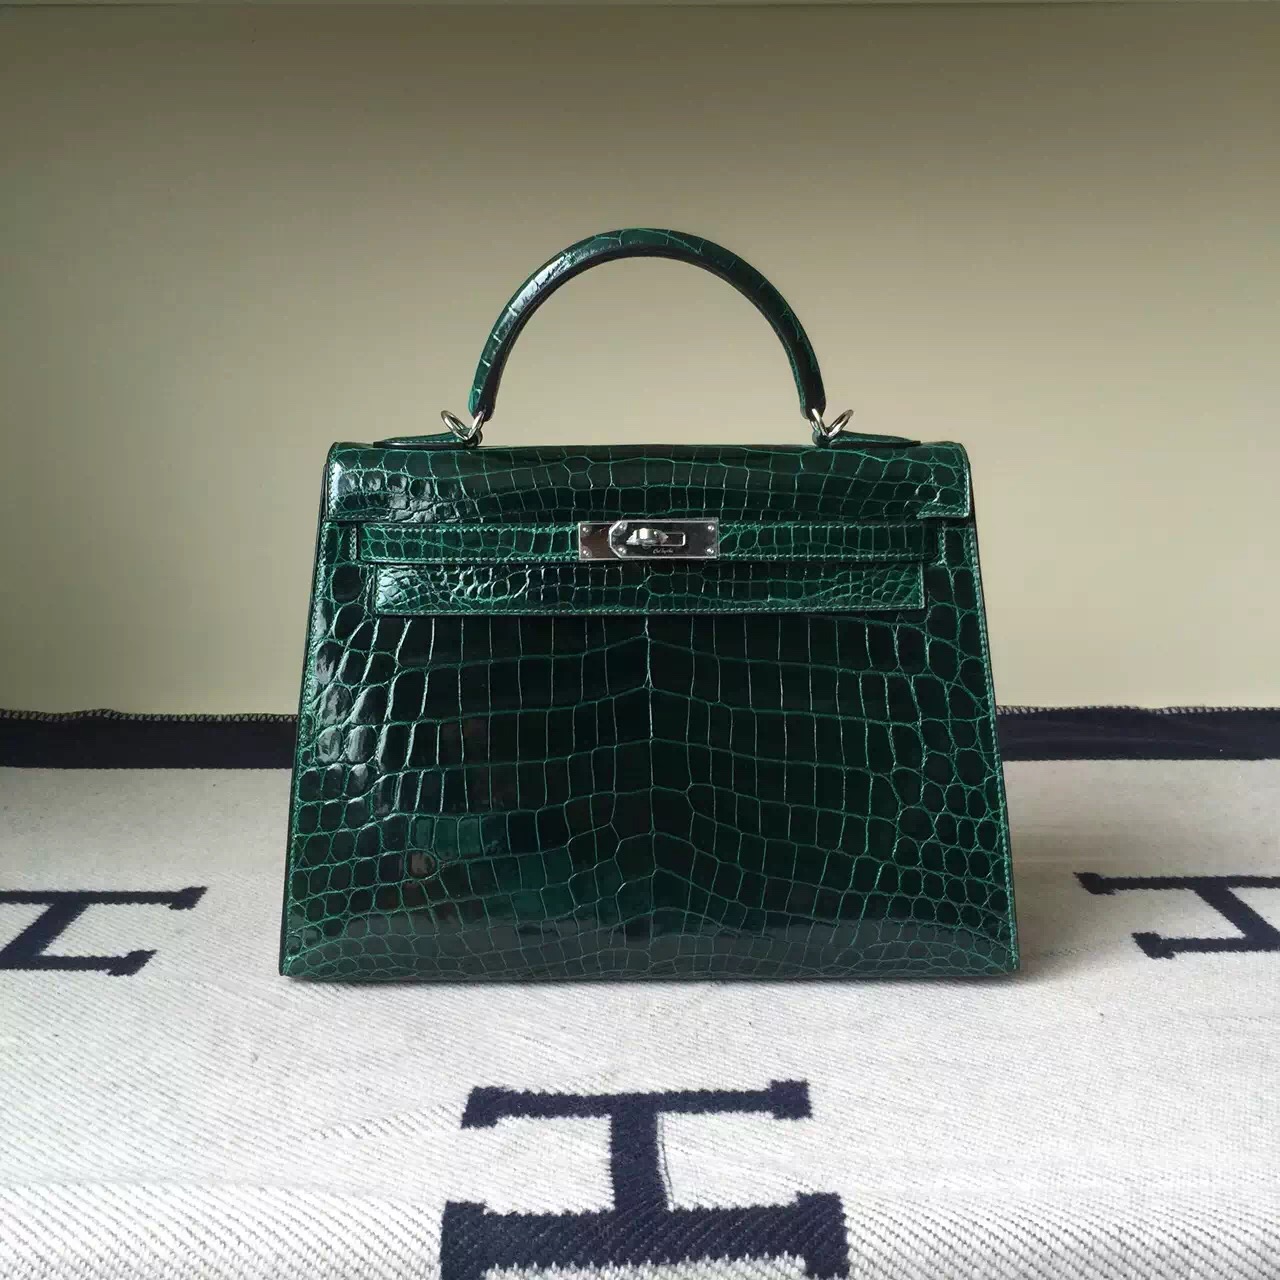 Hand Stitching Hermes Crocodile Leather Kelly Bag32cm in CK67 Vert Fonce